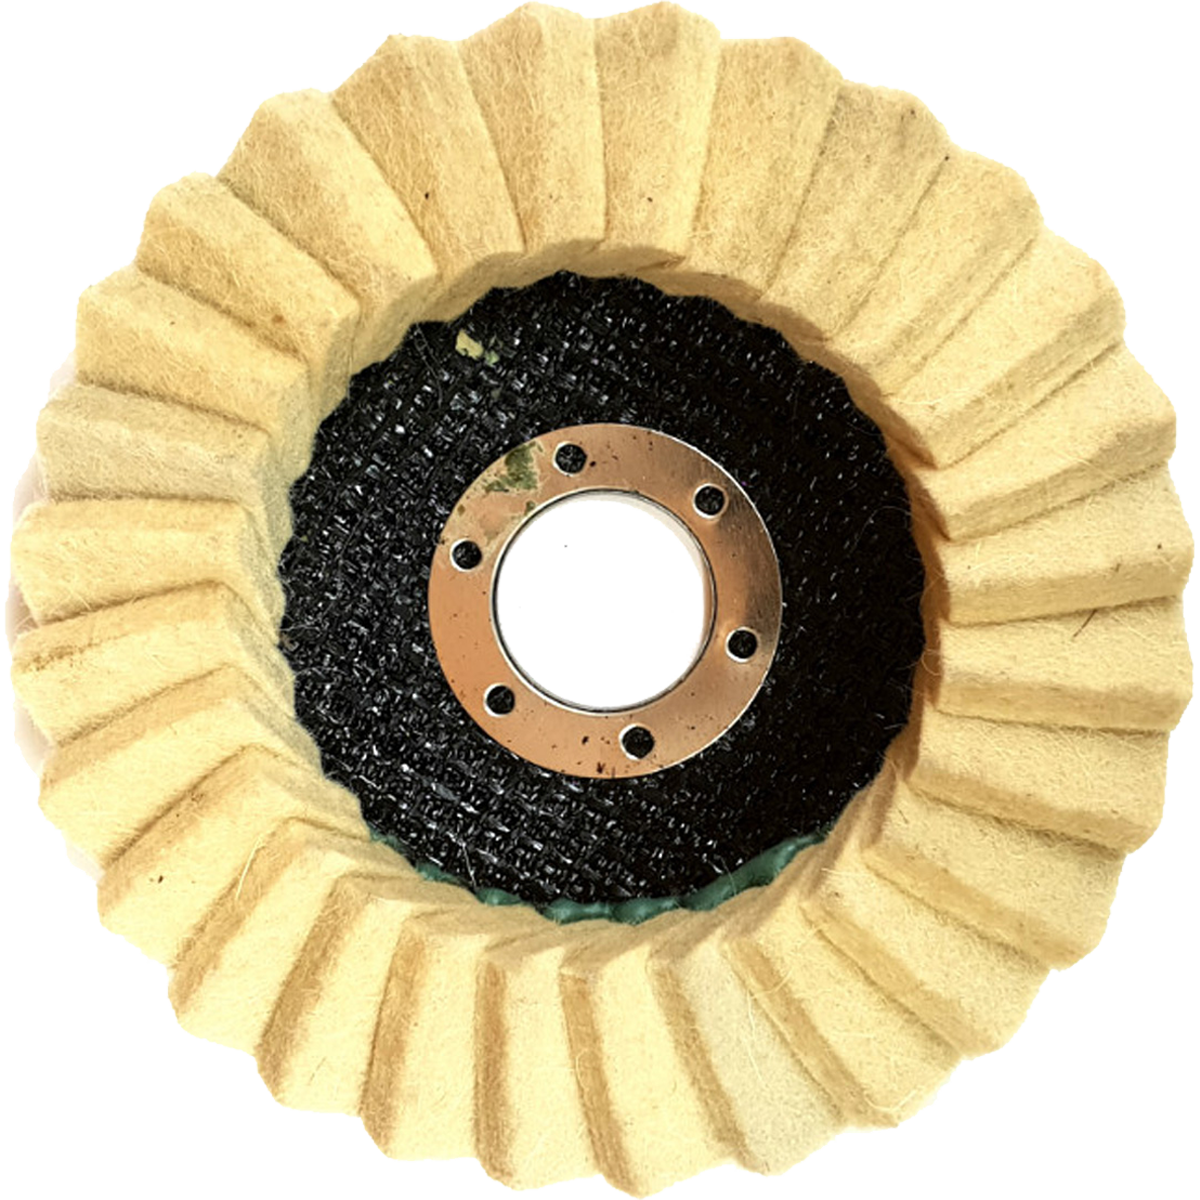 A range of polishing and cleaning discs. Designed to polish and clean a variety of different materials.